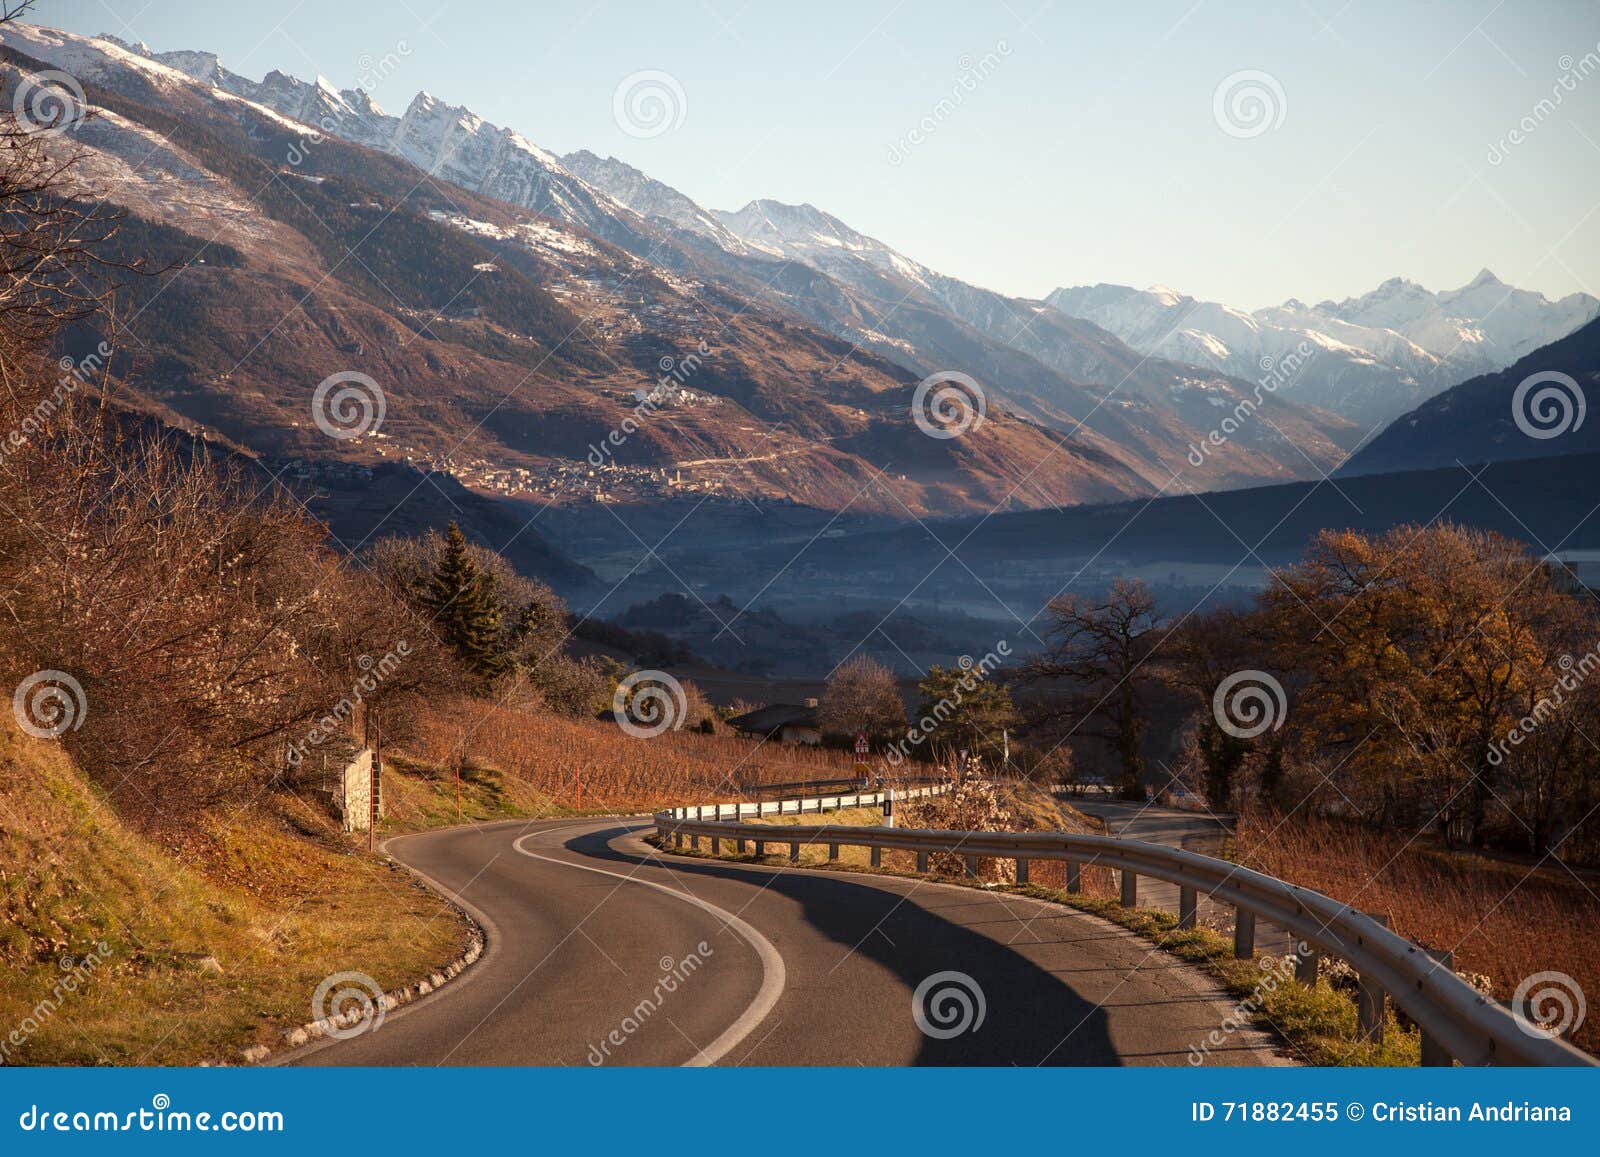 views of sierre and the alps from crans-montana, switzerland